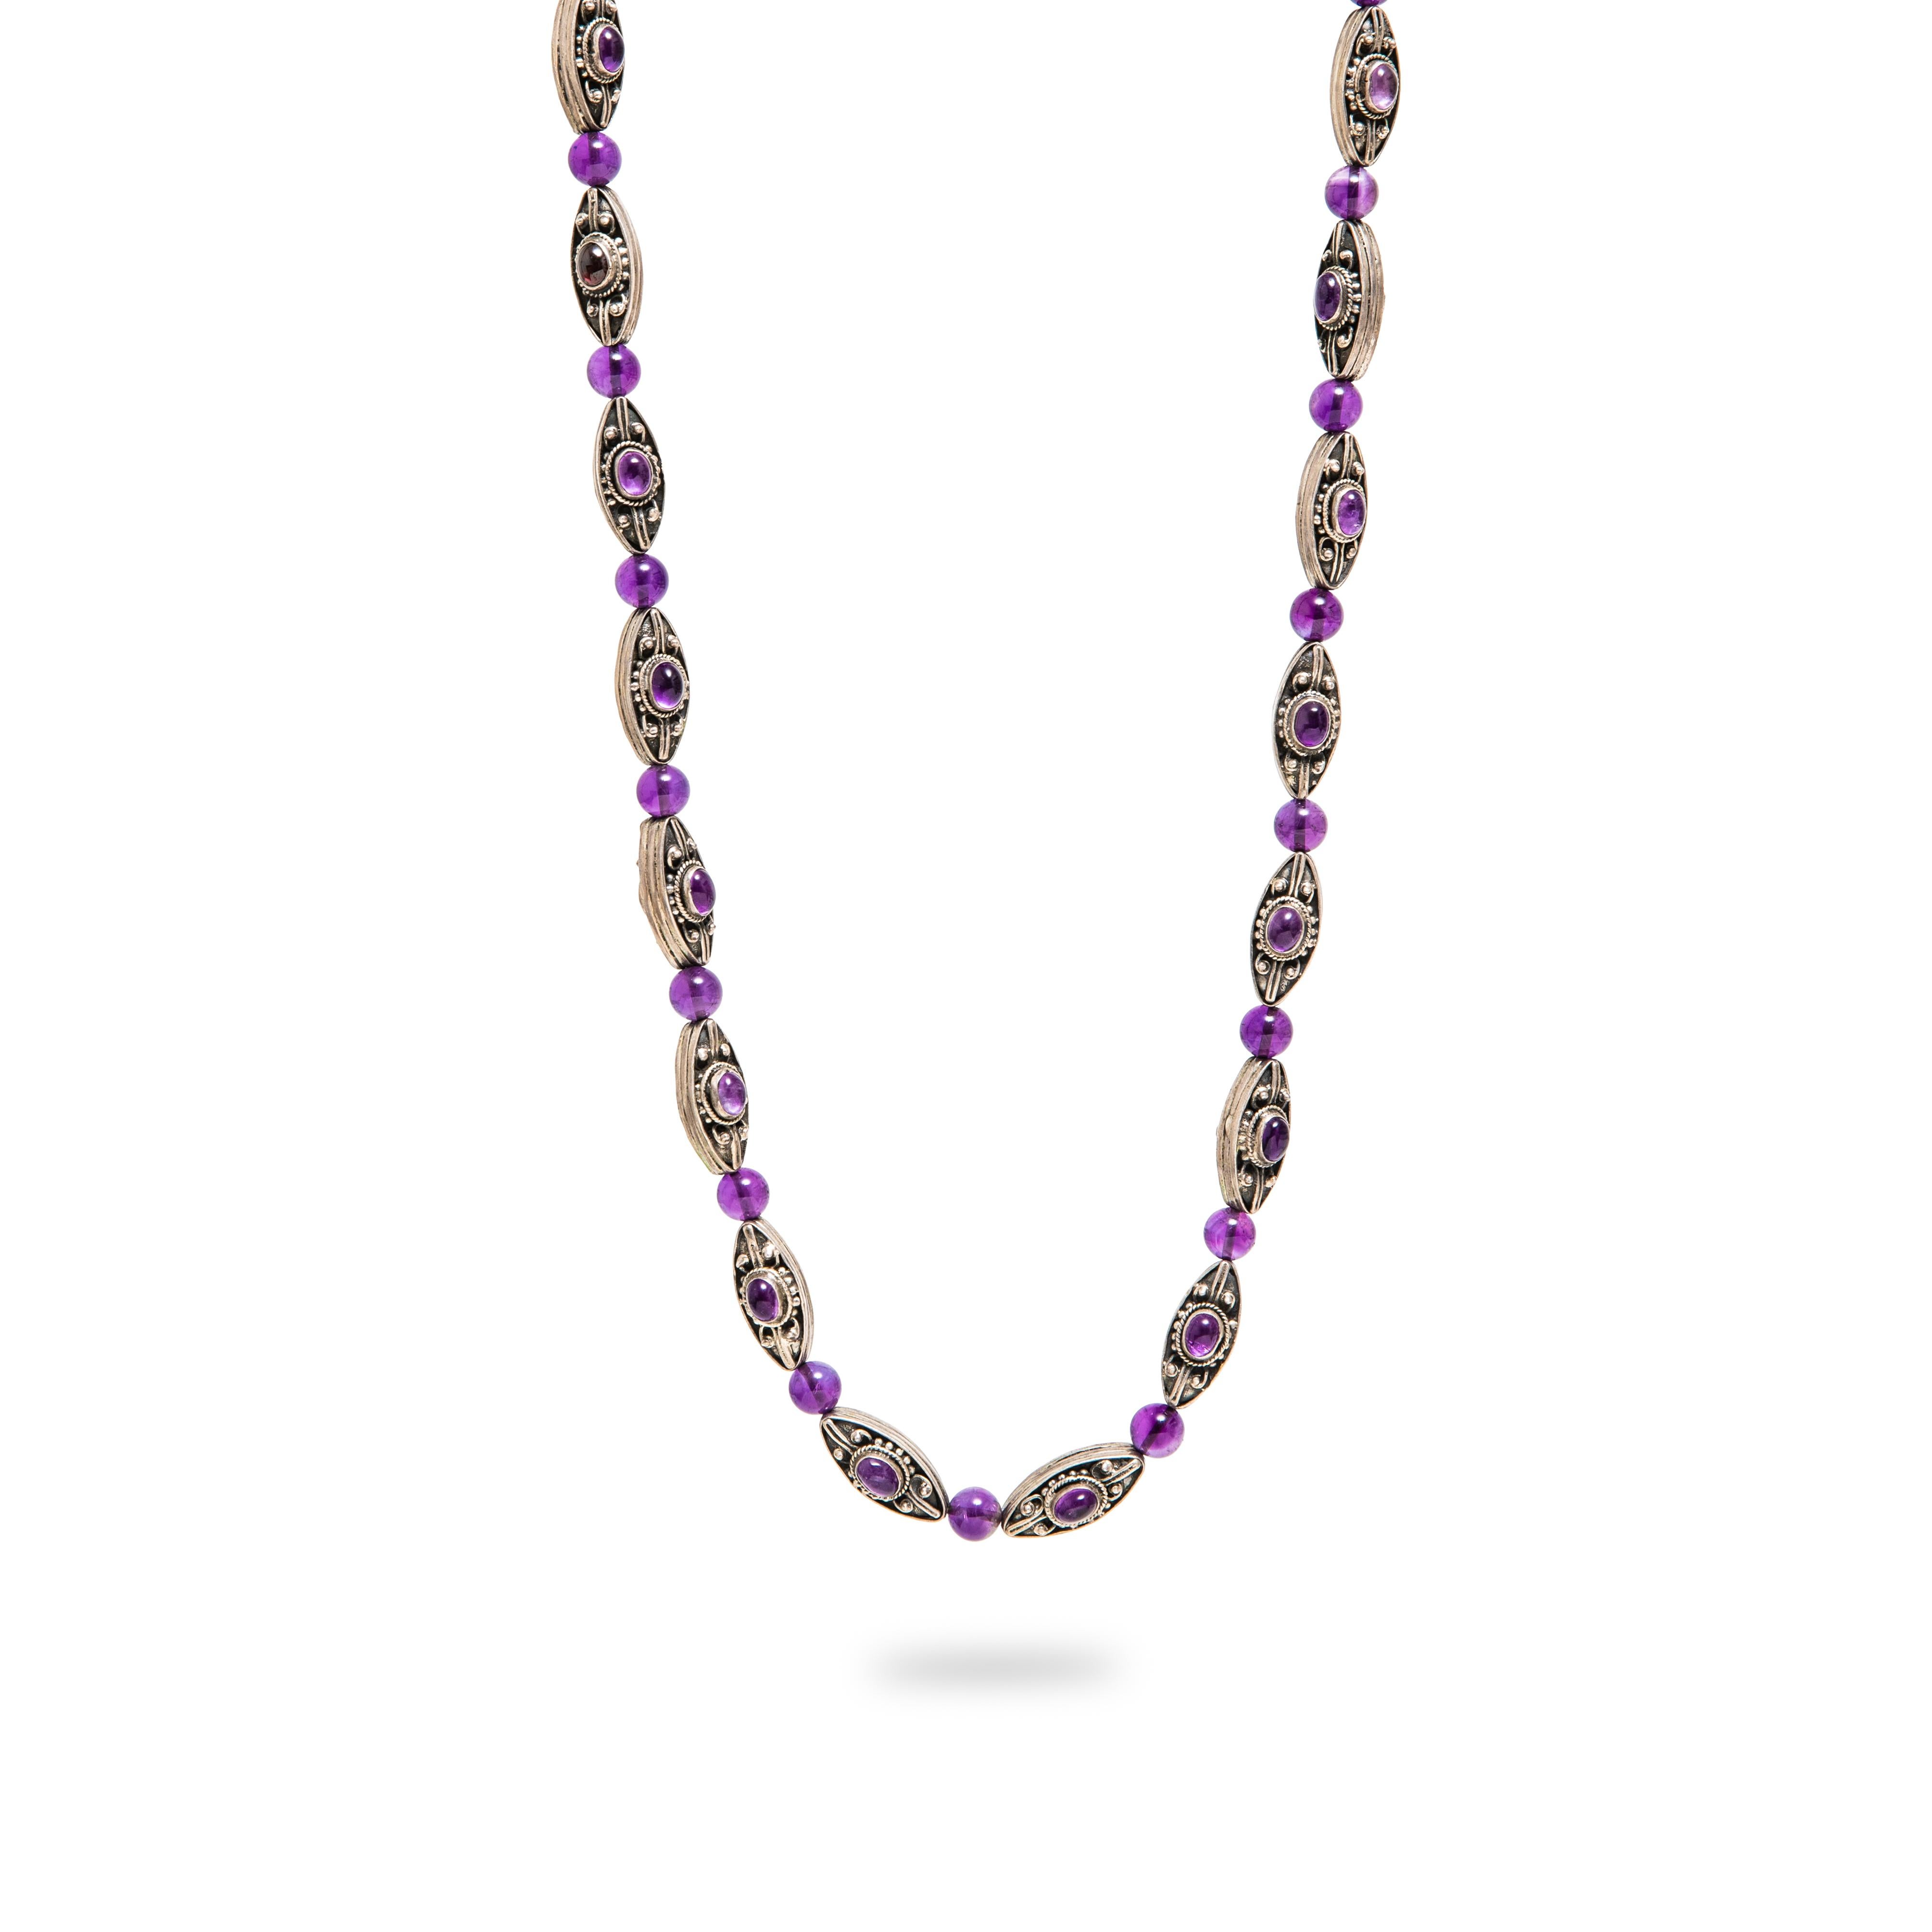 Offered is a Georg Jensen Style Silver and Amethyst Oval Cabochon and Beads Necklace. the necklace measures 30